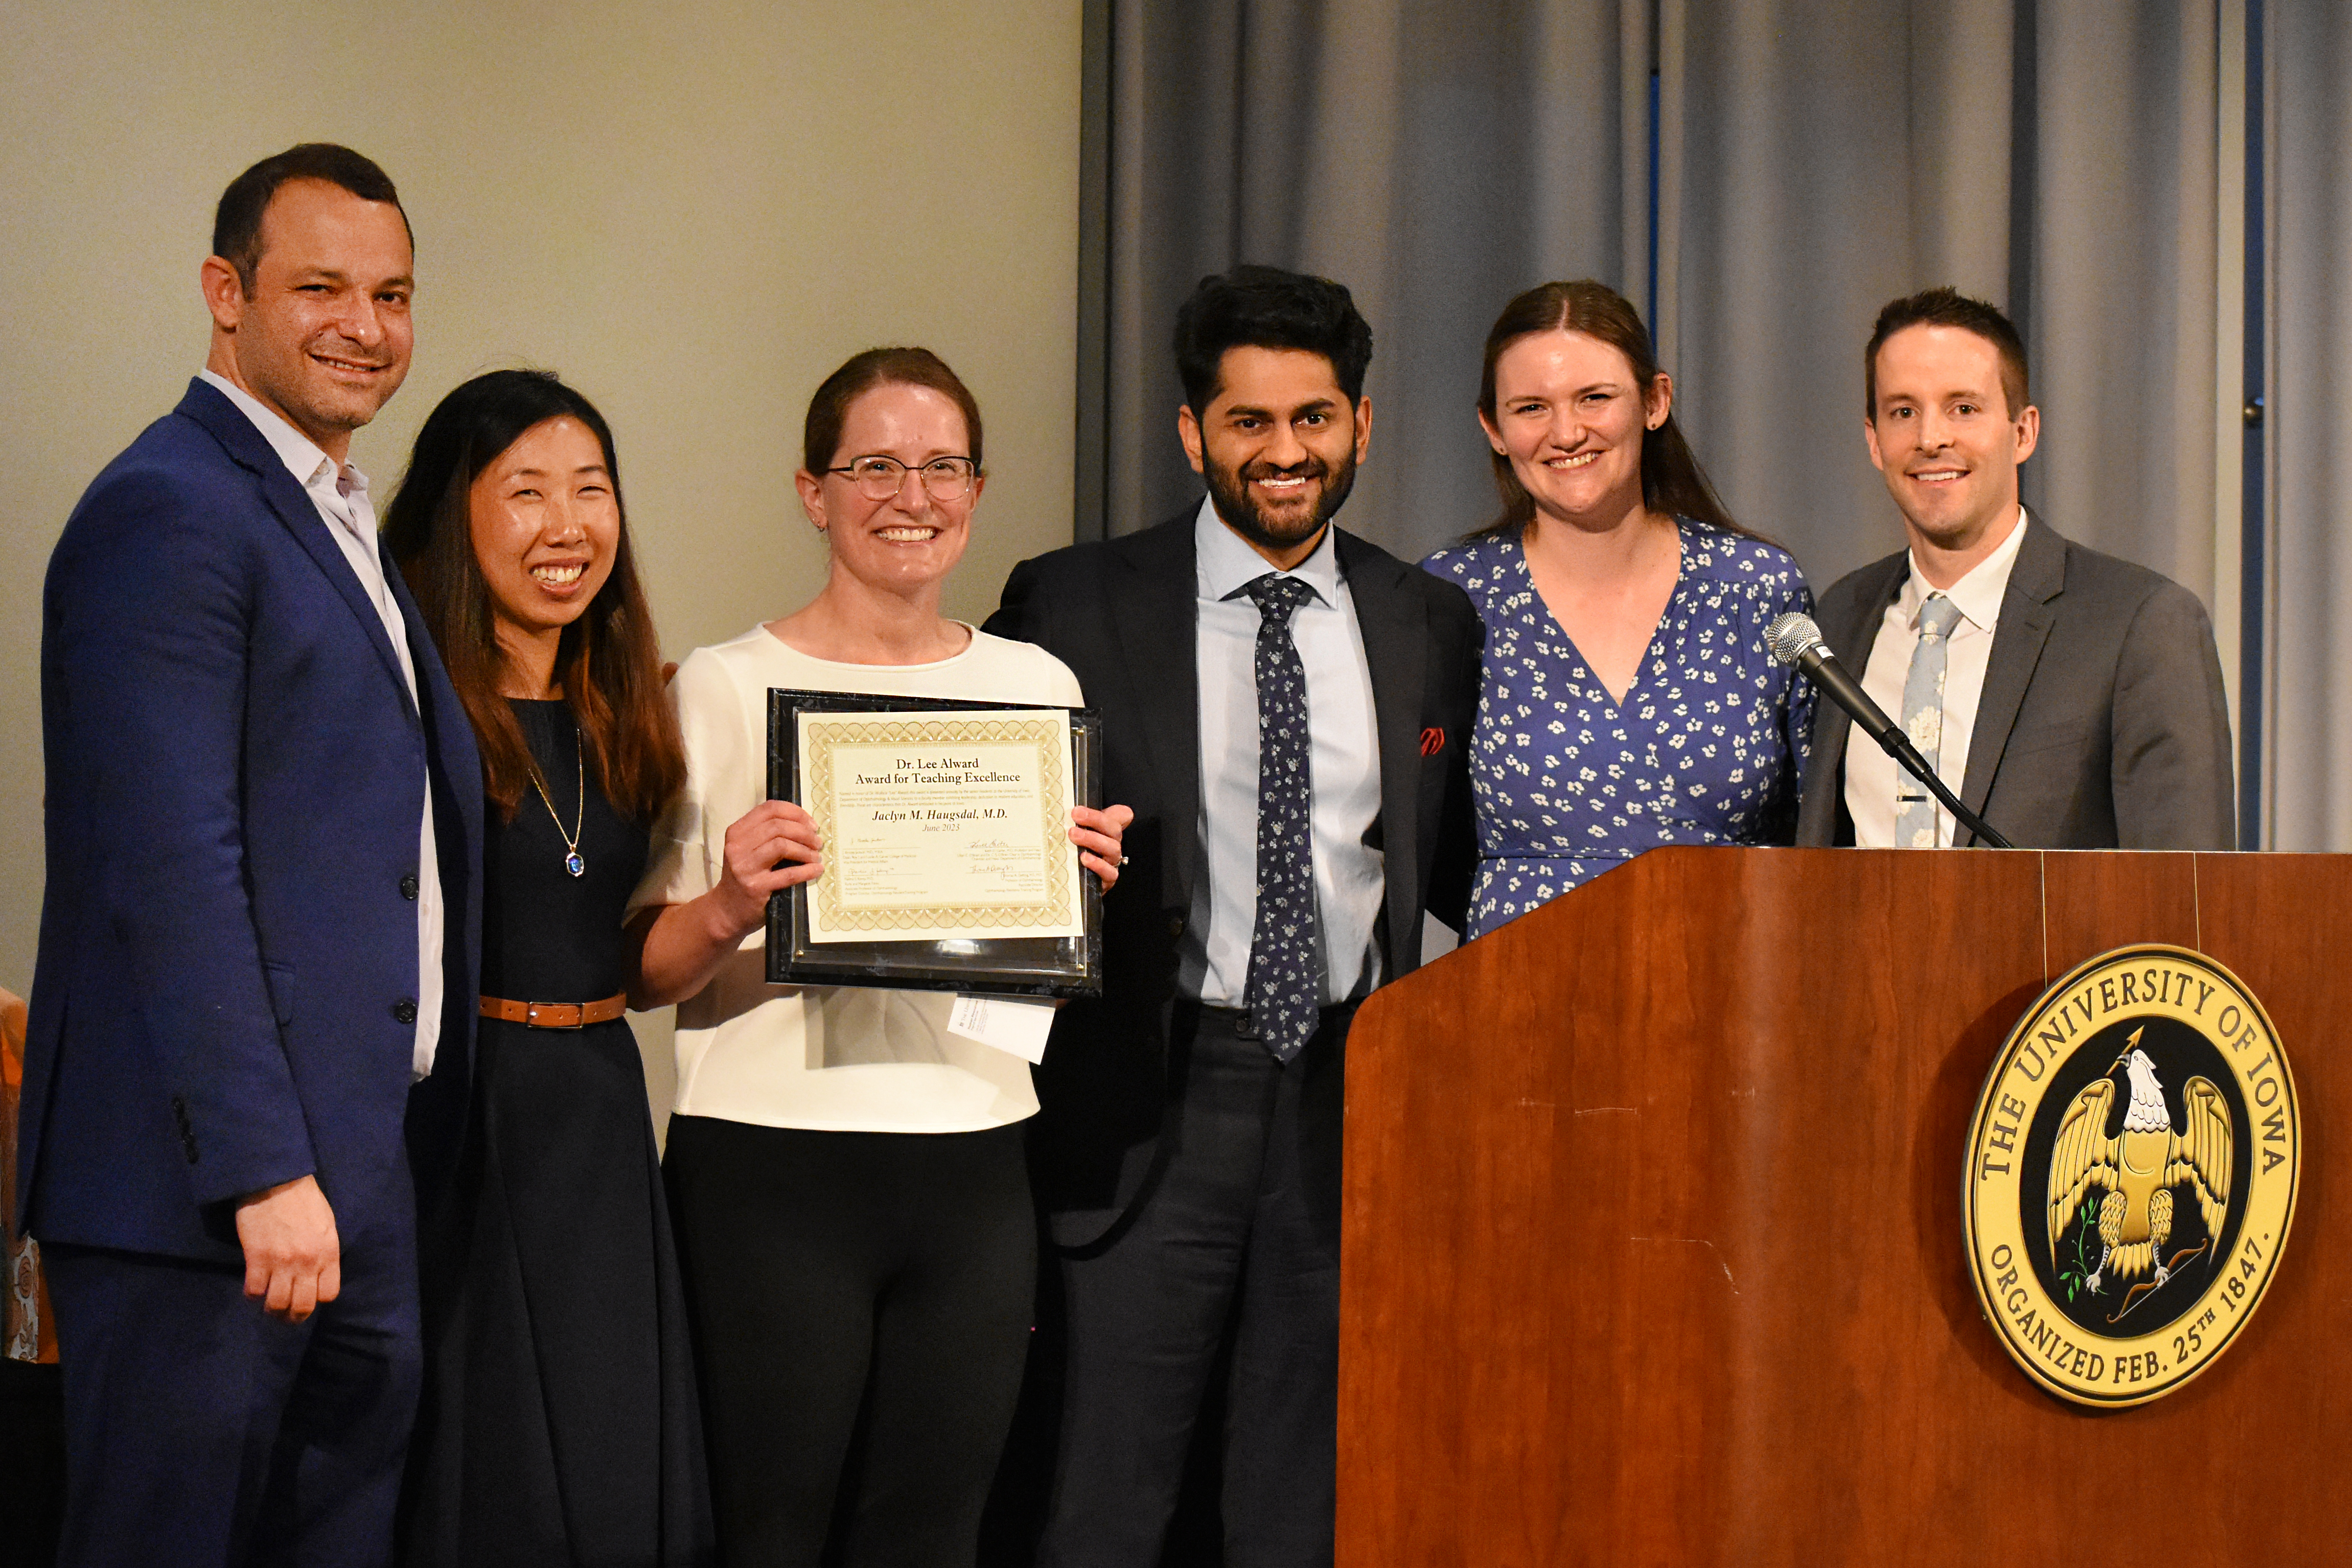 The Chief Residents presented Dr. Jaclyn Haugsdal with the inaugural "Dr. Lee Alward Award for Teaching Excellence" at the 2023 Graduation Ceremony